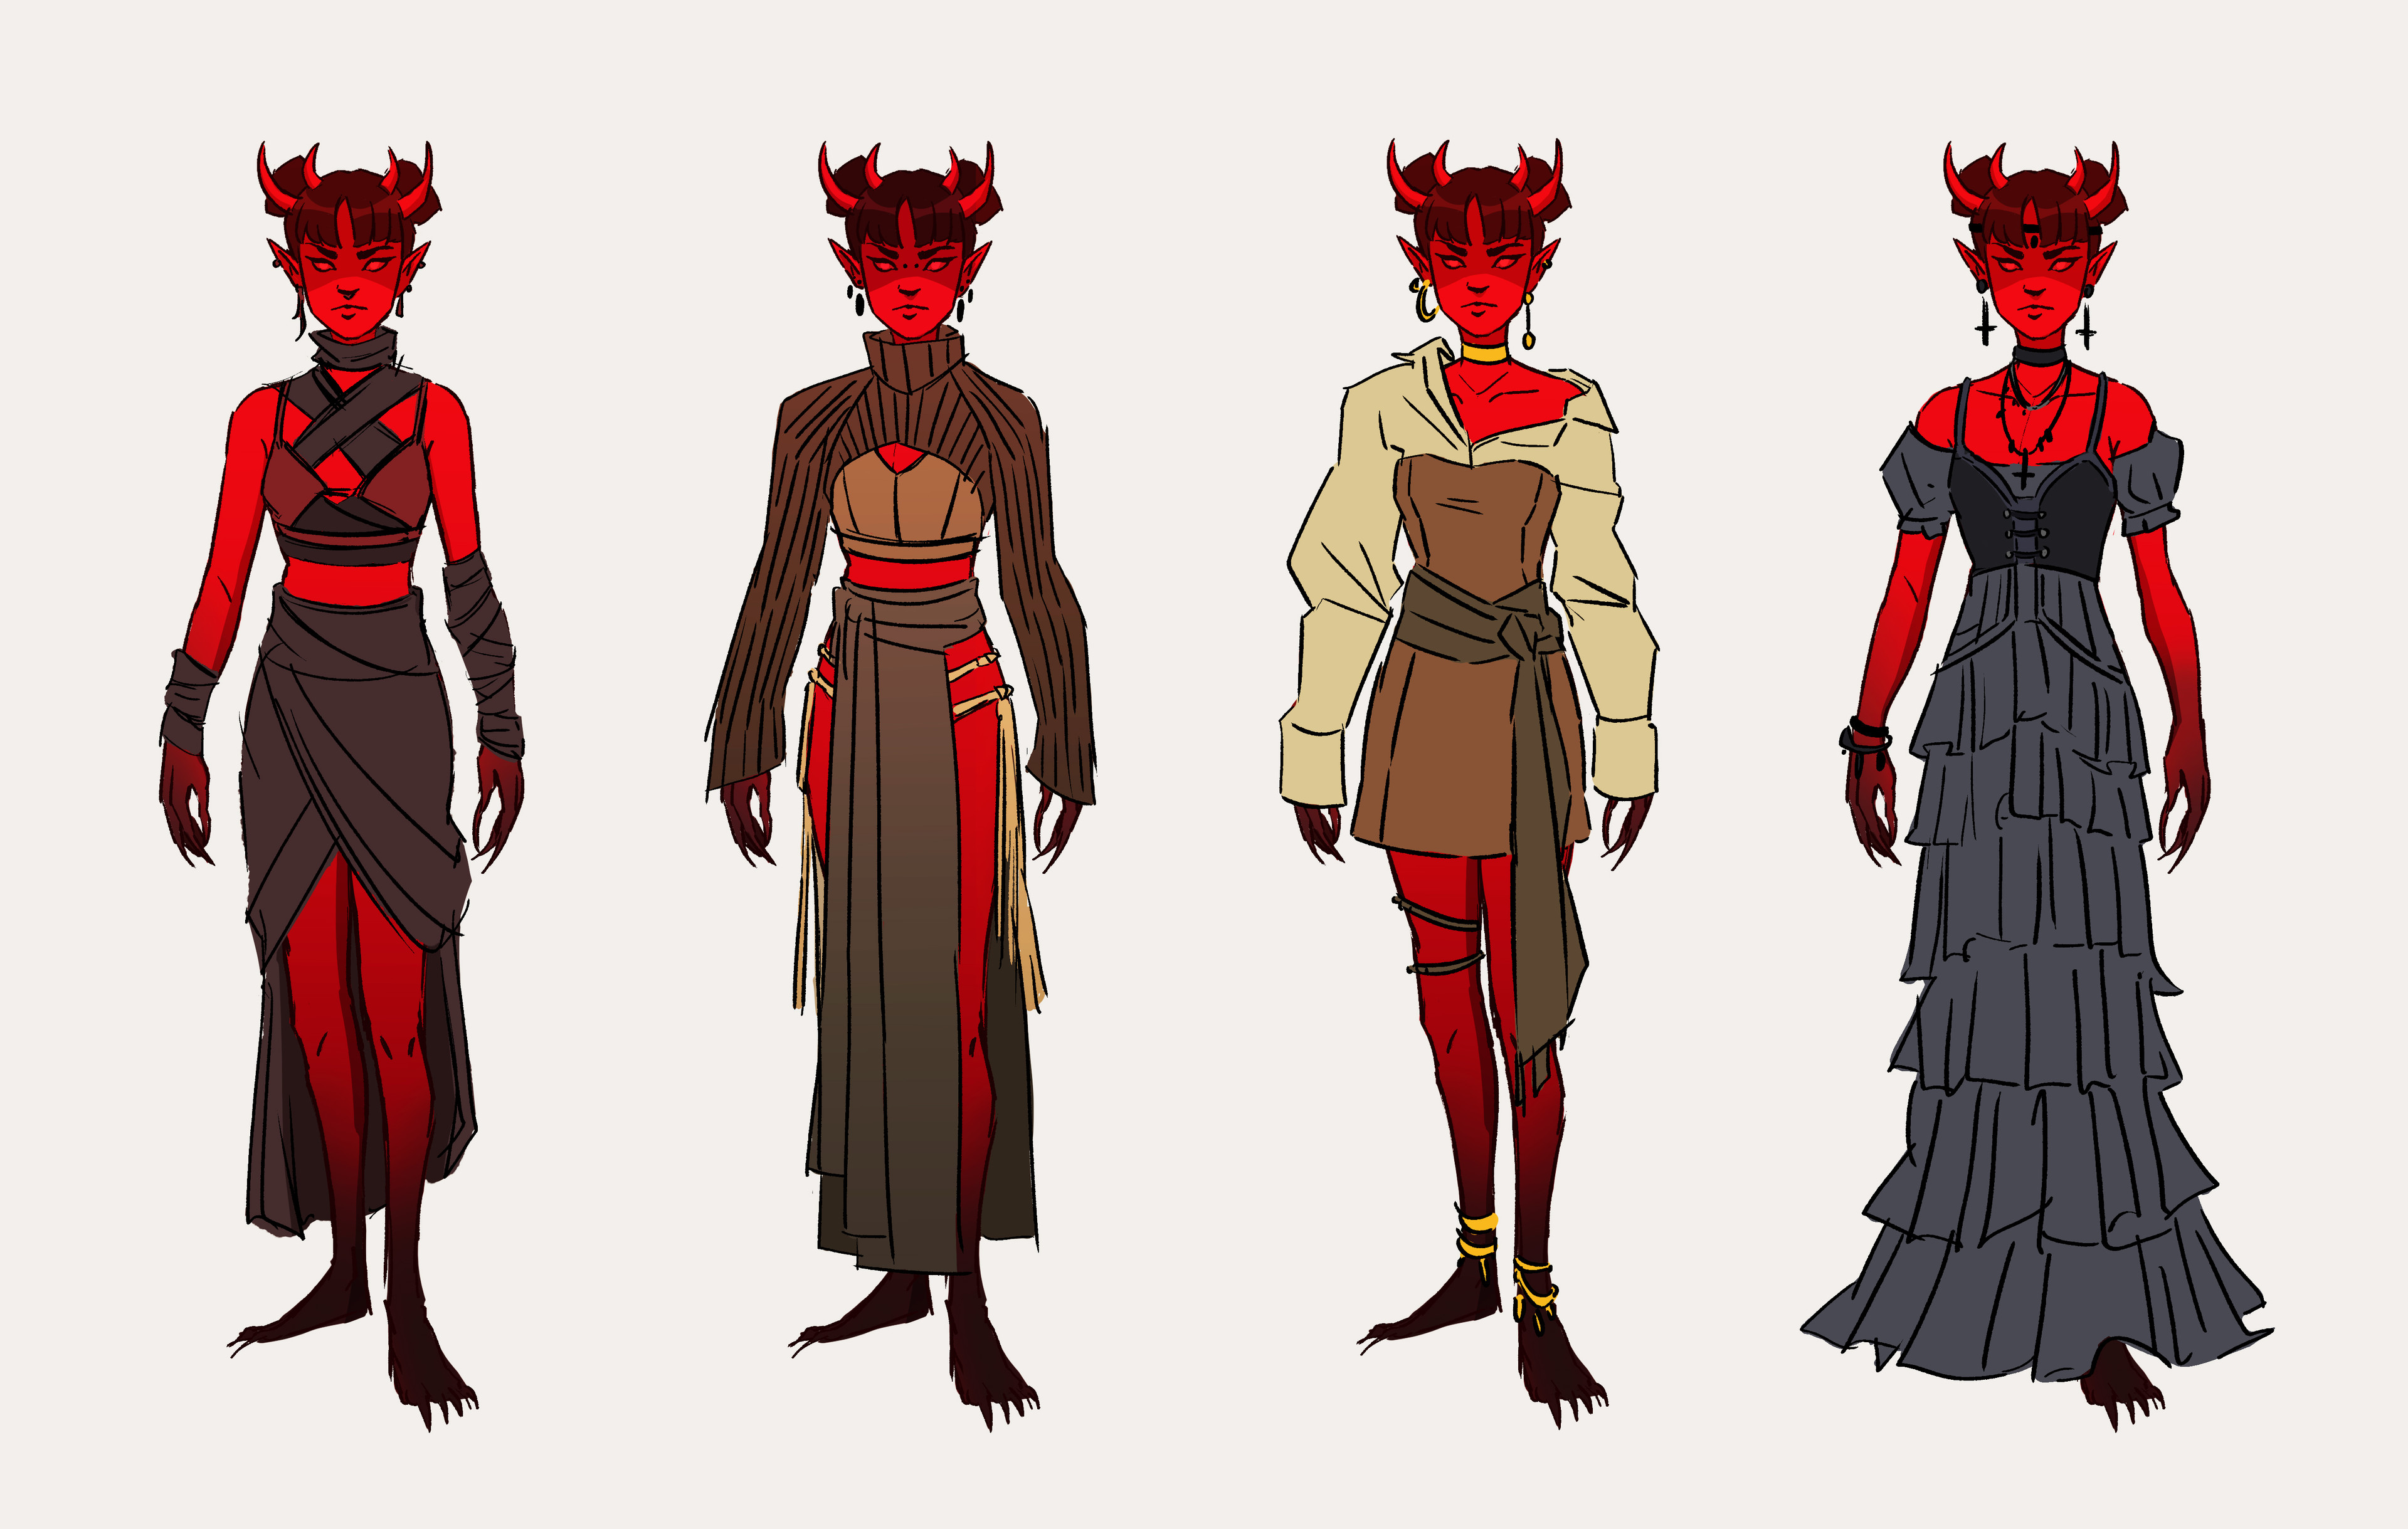 Clothing iterations for a character named Lucy.